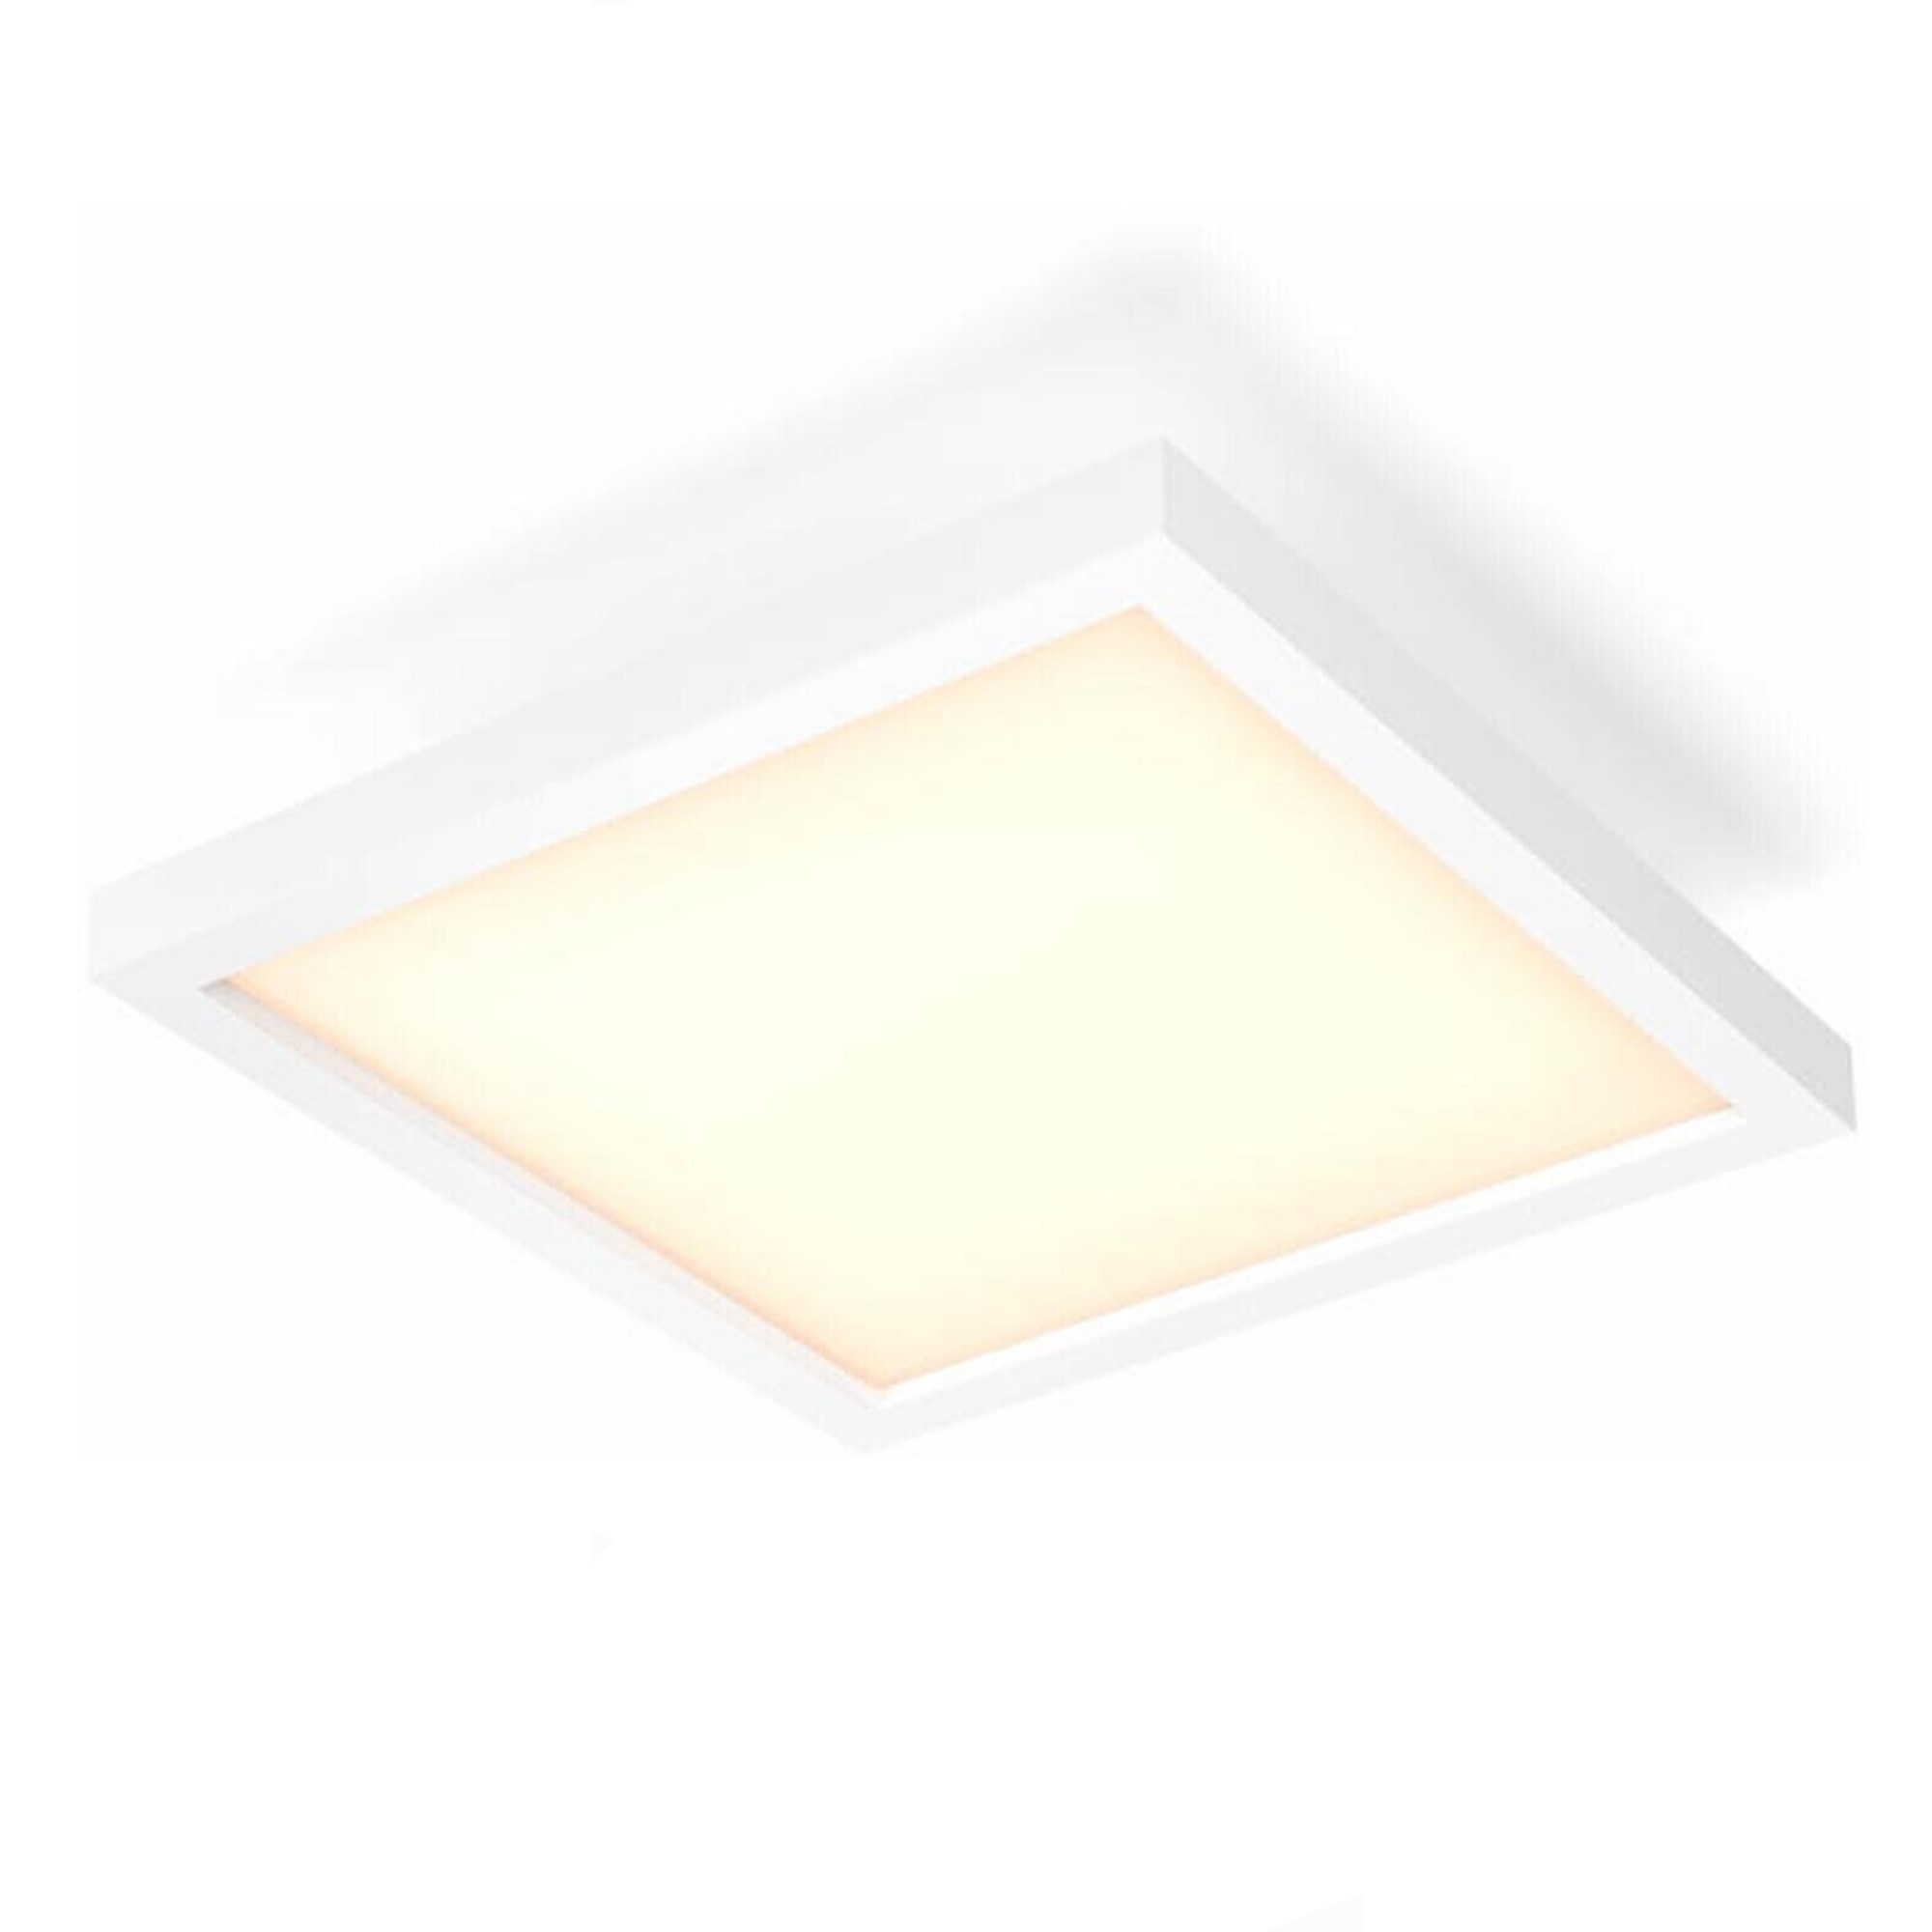 Philips Hue White Ambiance LED Panel Aurelle white 60x60cm incl. Dimmer Switch 1820lm